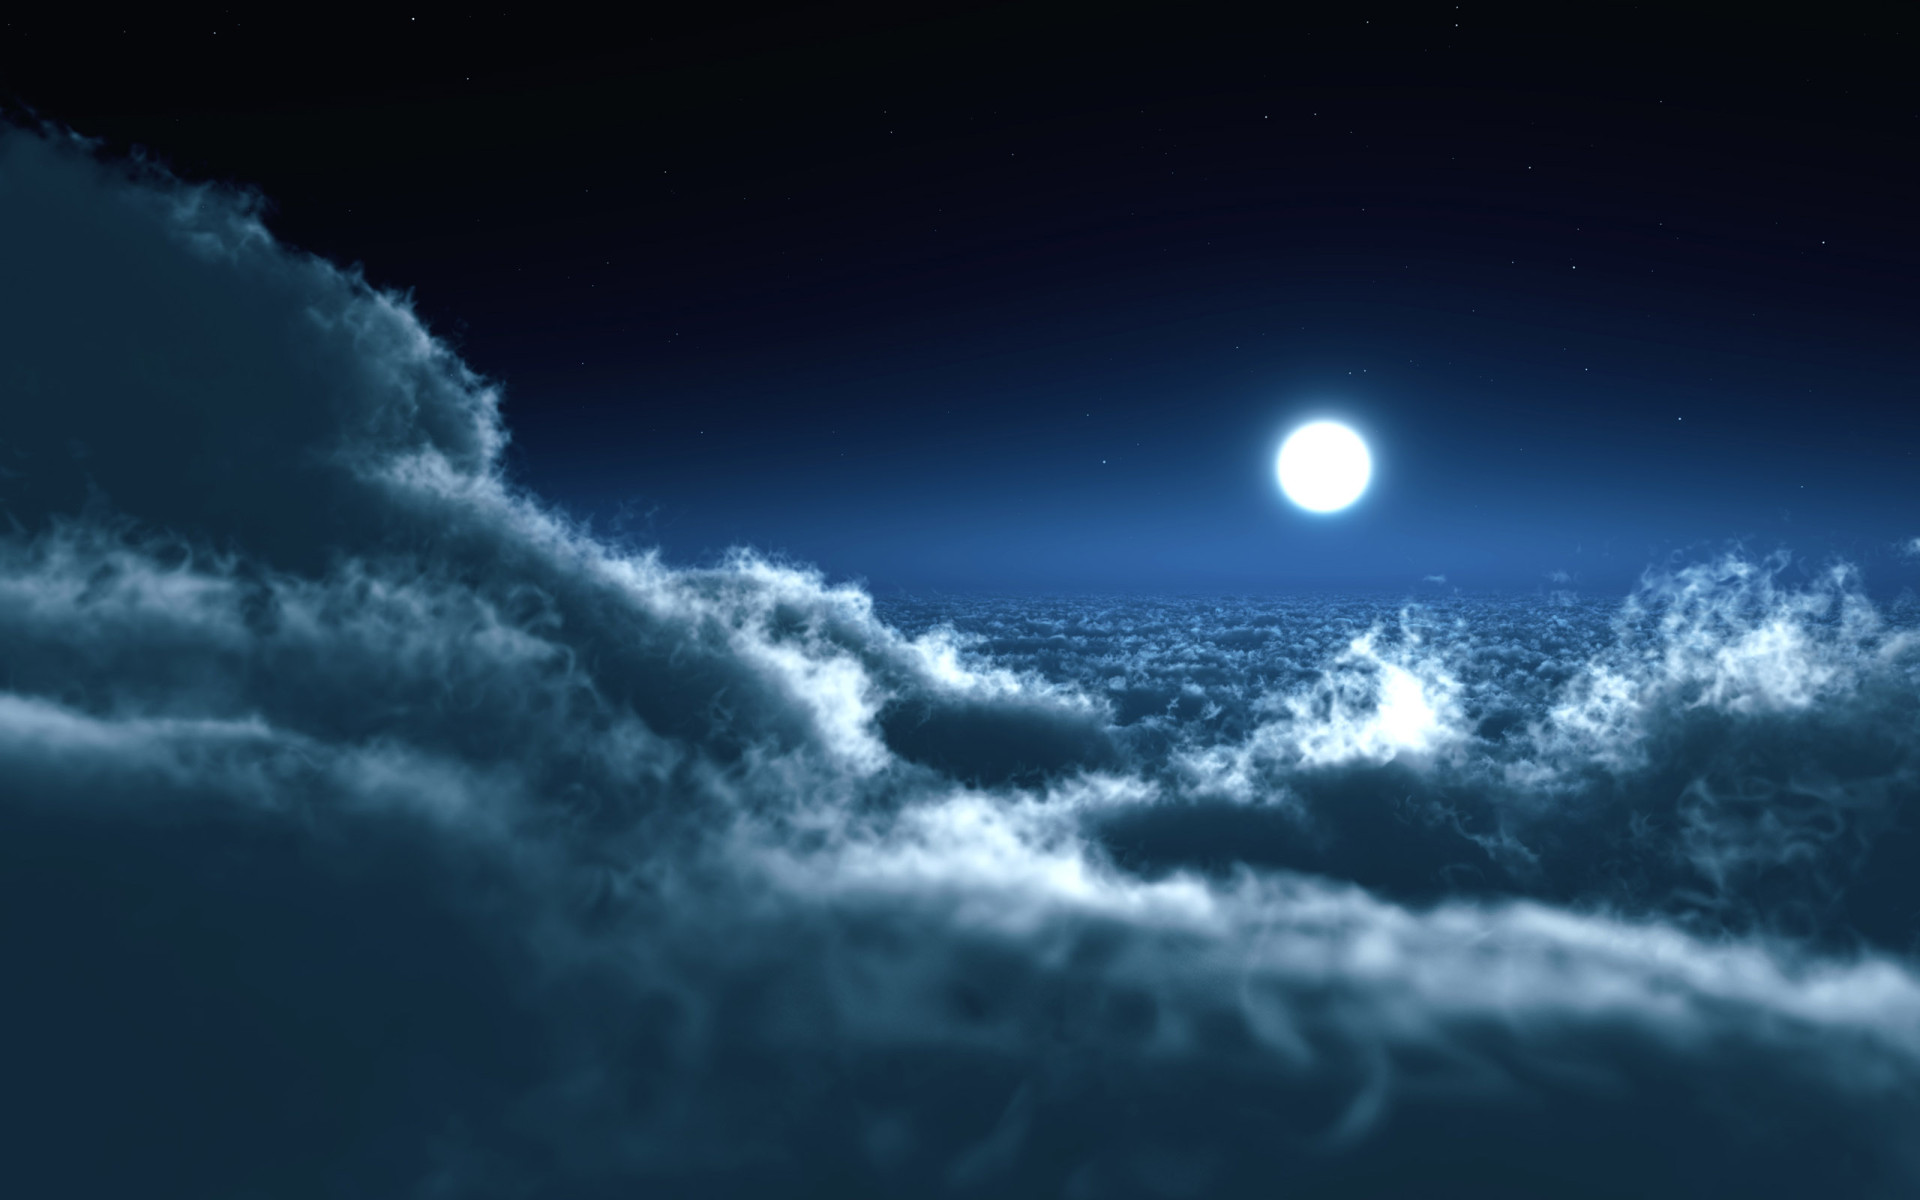 The moon above the clouds night sky